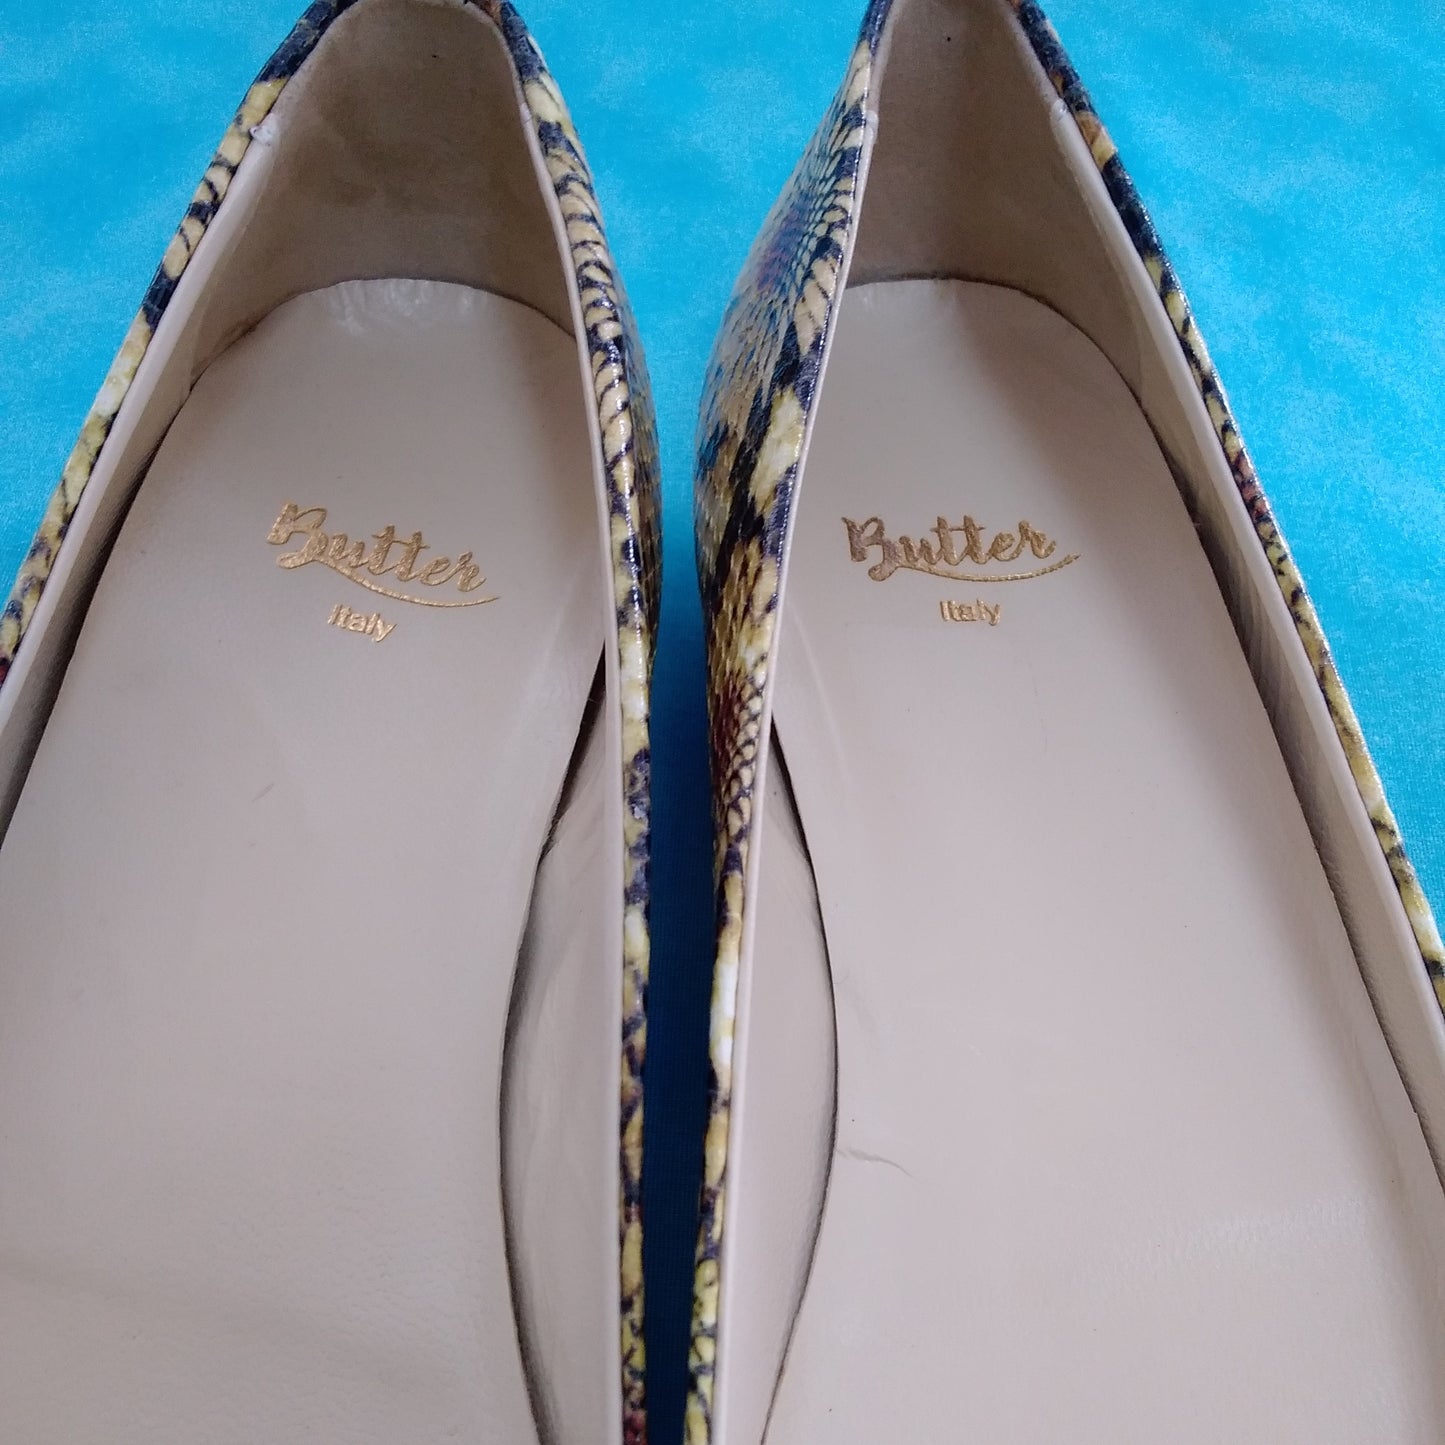 Butter Yellow/Black Floral Flats with Gold Tips made in Italy - Size: 8